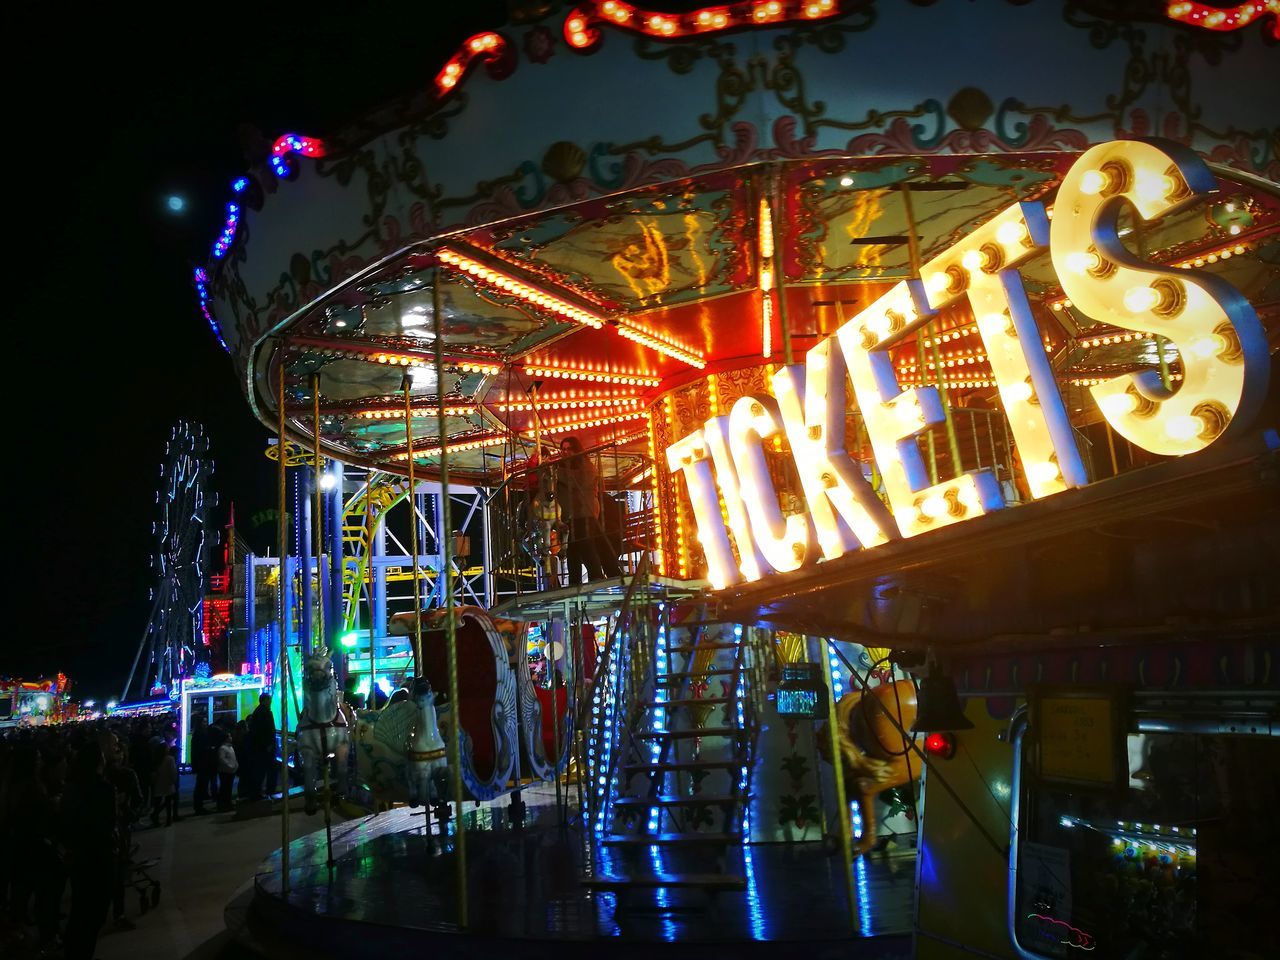 amusement park, arts culture and entertainment, illuminated, night, amusement park ride, carousel, leisure activity, enjoyment, merry-go-round, low angle view, multi colored, outdoors, no people, nightlife, sky